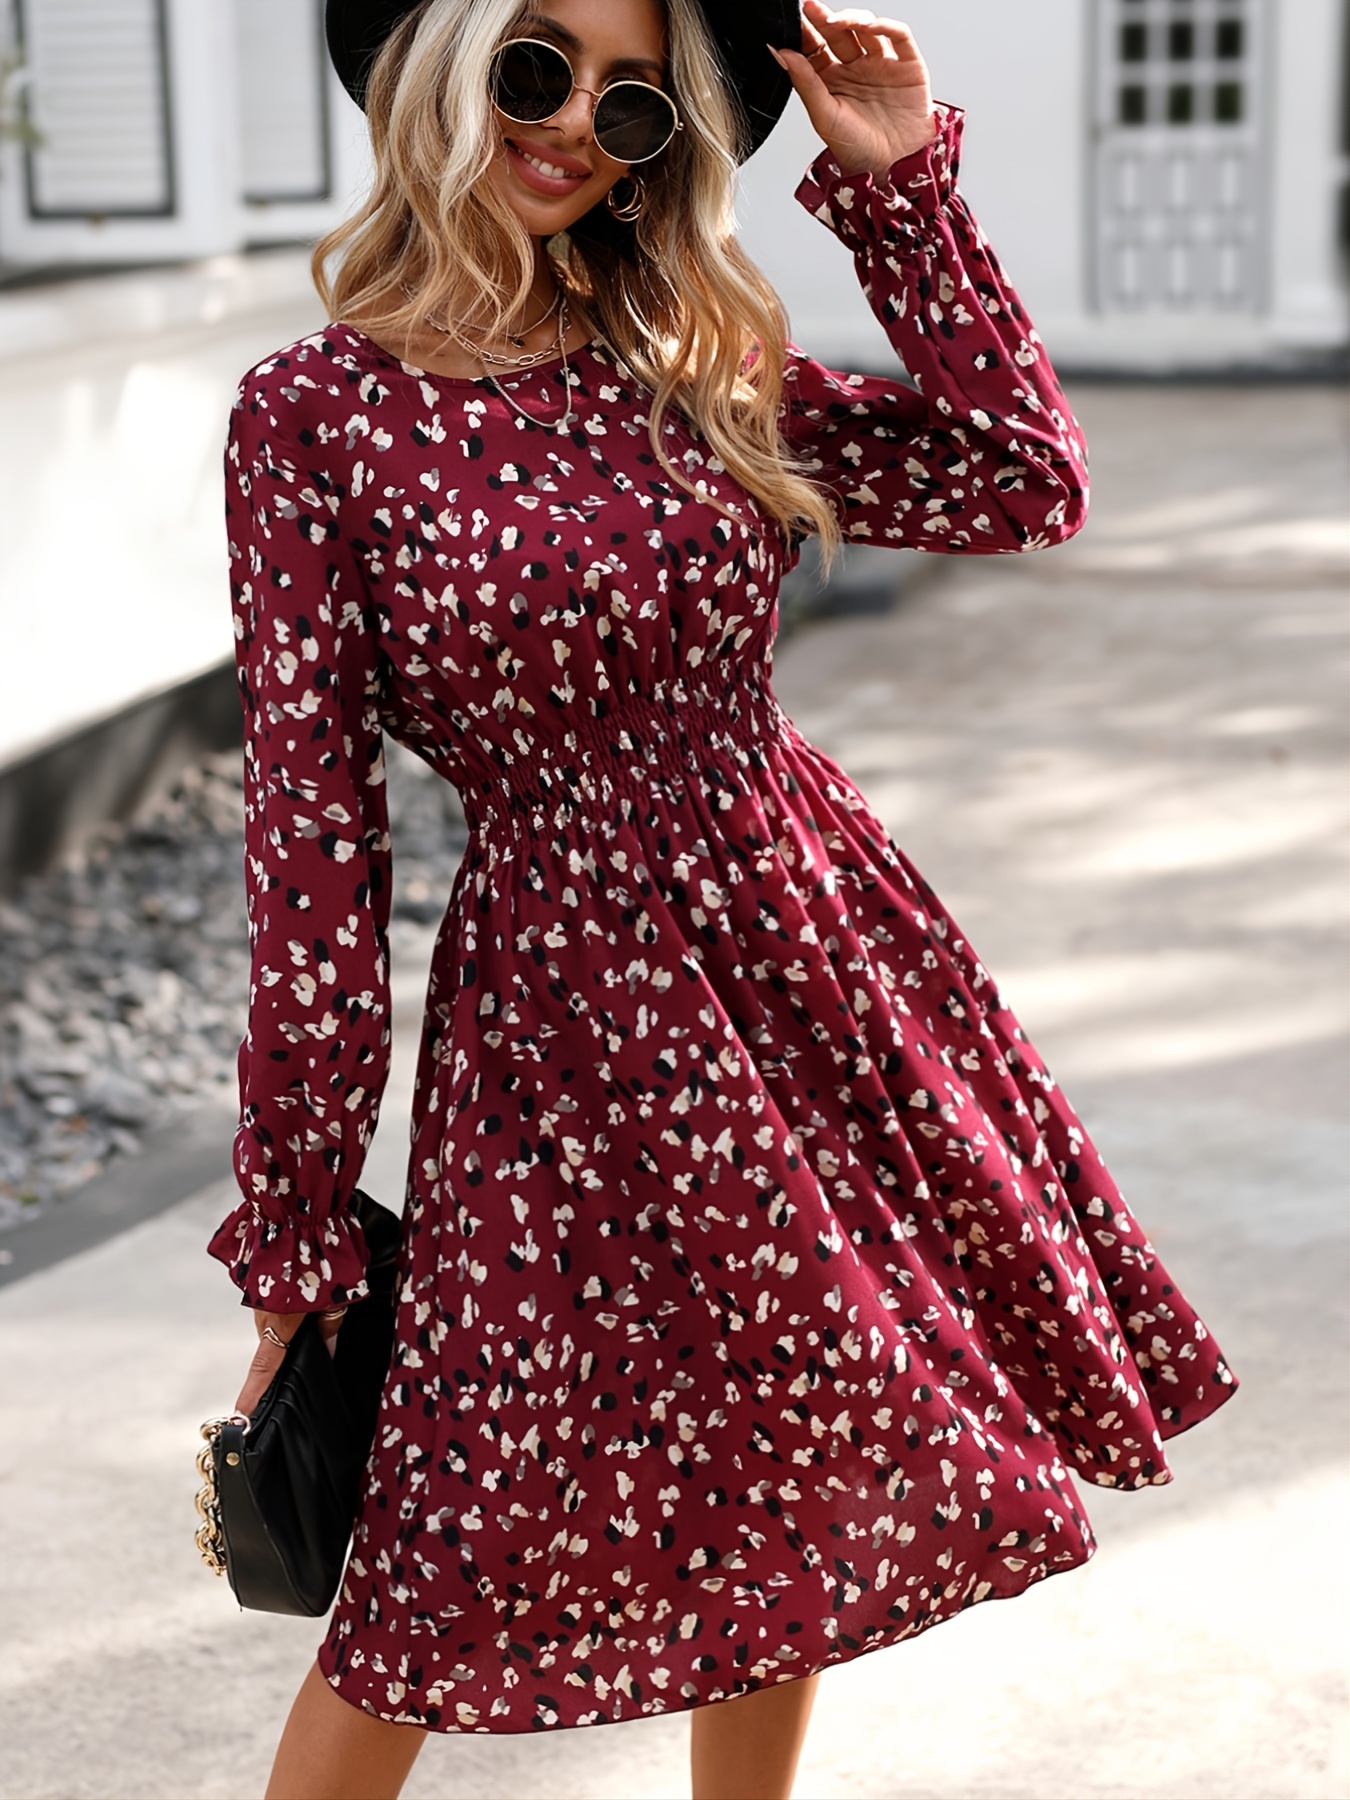 Floral Dress for Fall